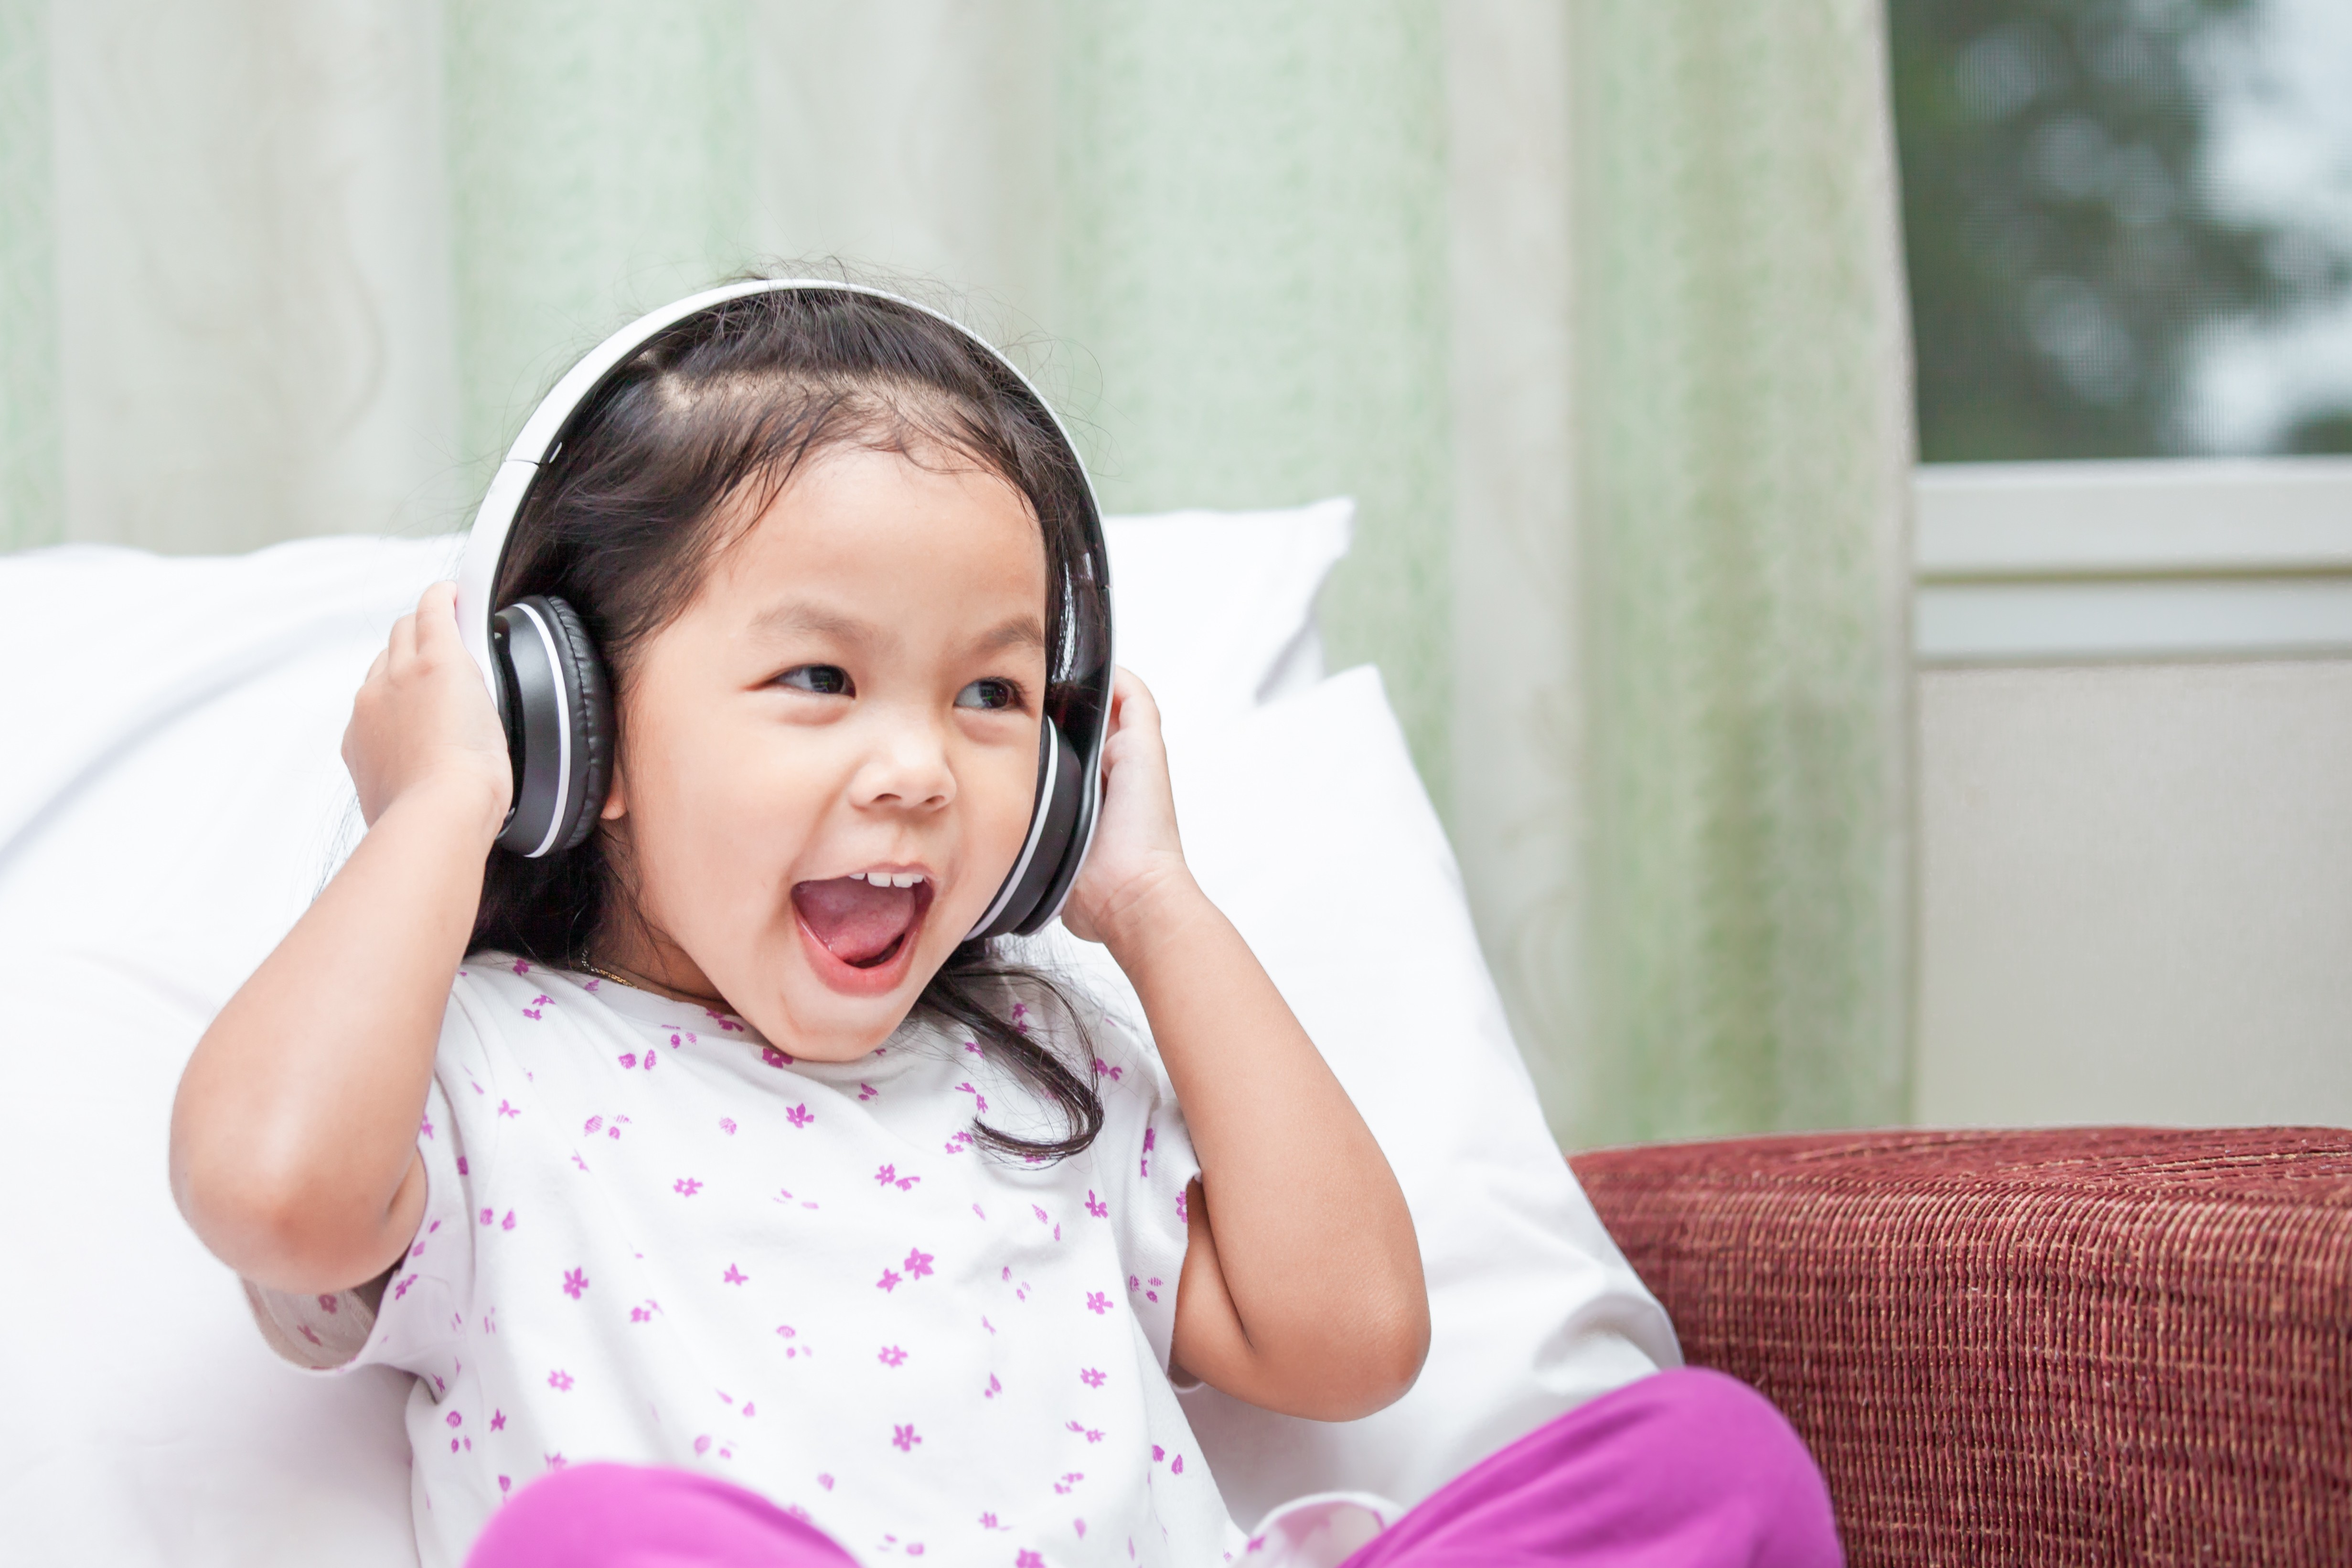 A trends towards audiobooks instead of tablets and phones will be welcome news for parents. Photo: Shutterstock